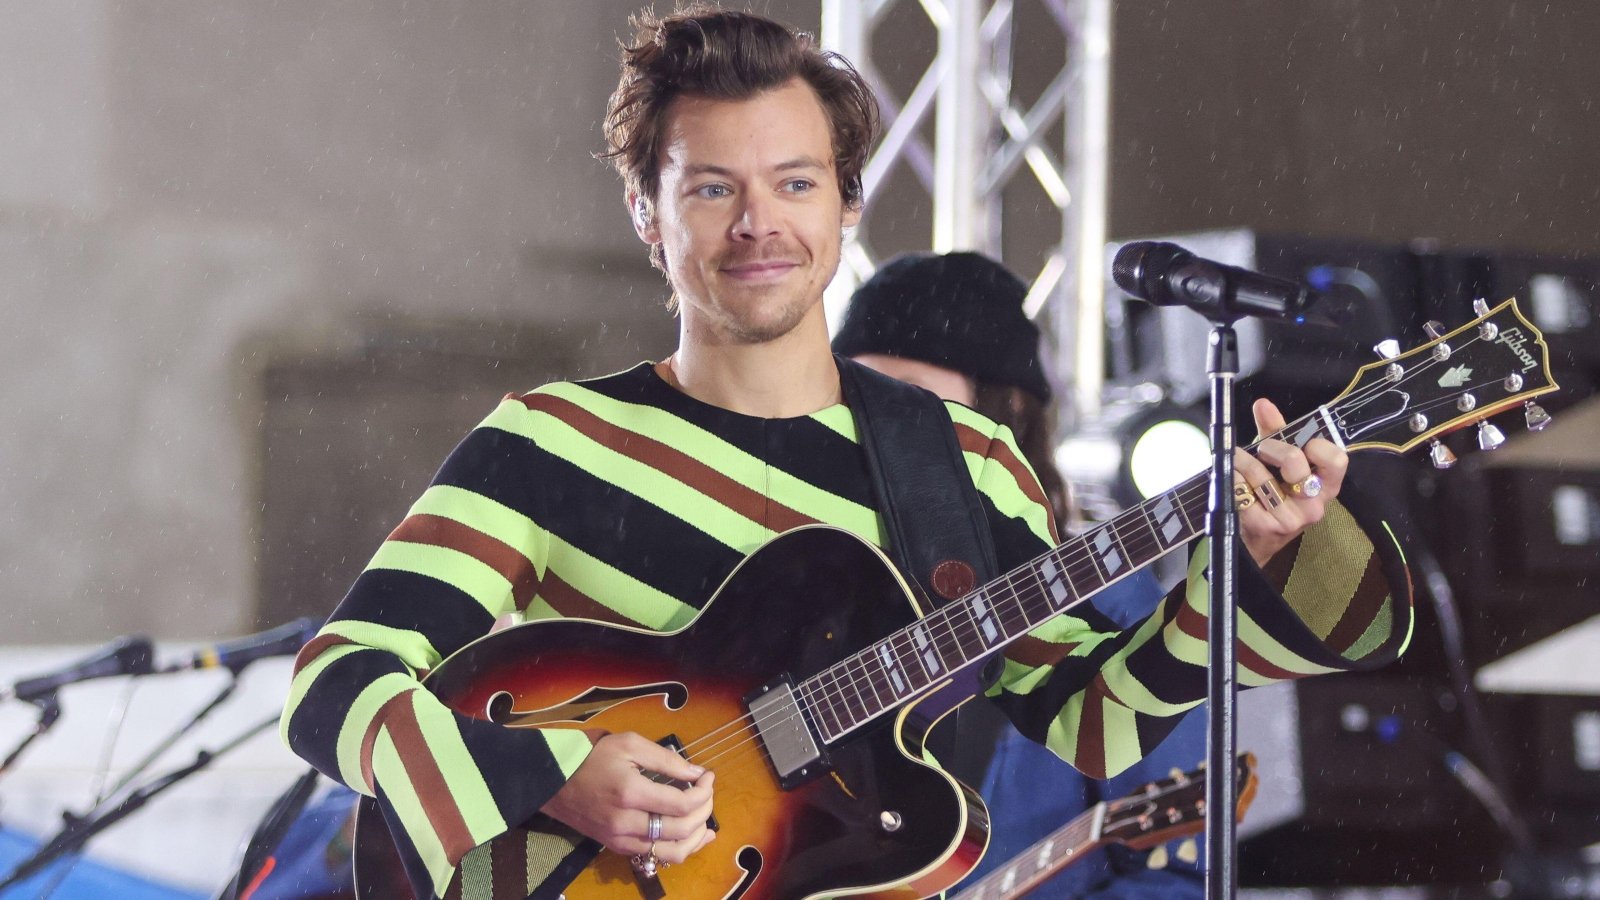 Harry Styles holds a guitar while on stage